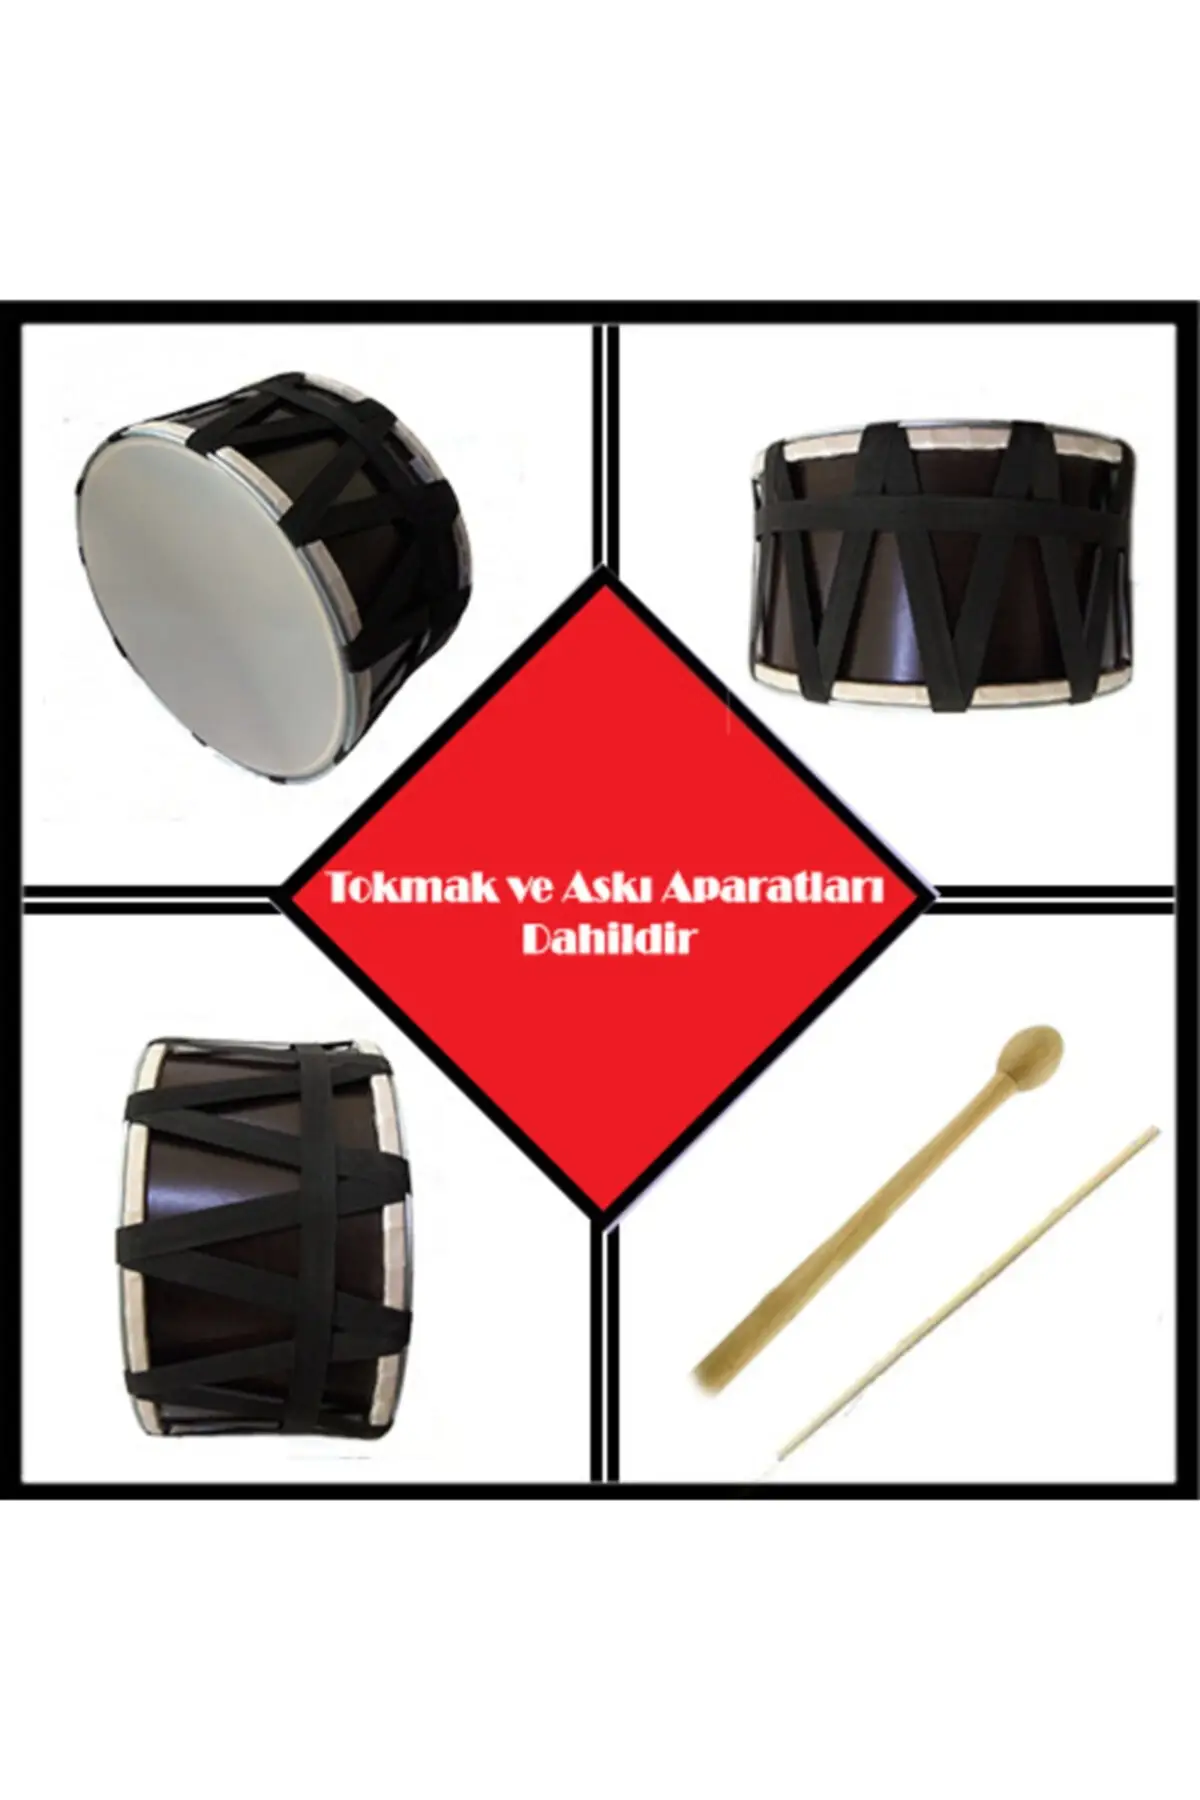 Children's Drum Made of Real Material - Mallet and Stick Included 30 Cm High Sound Quality Toy For Kids